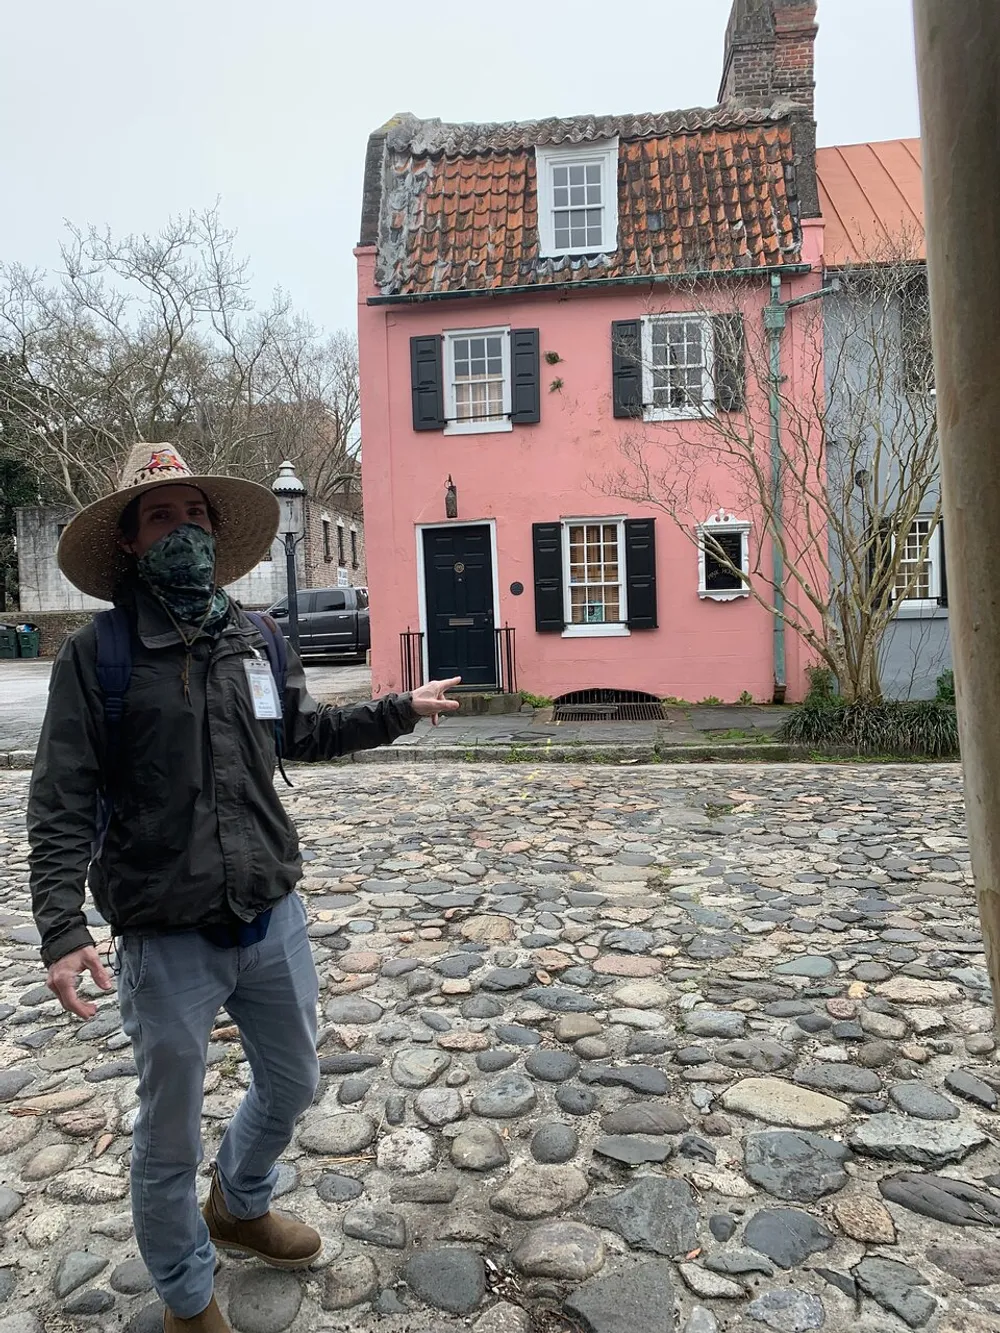 A person wearing a hat and mask is gesturing towards a small pink house with a tiled roof on a cobblestone street